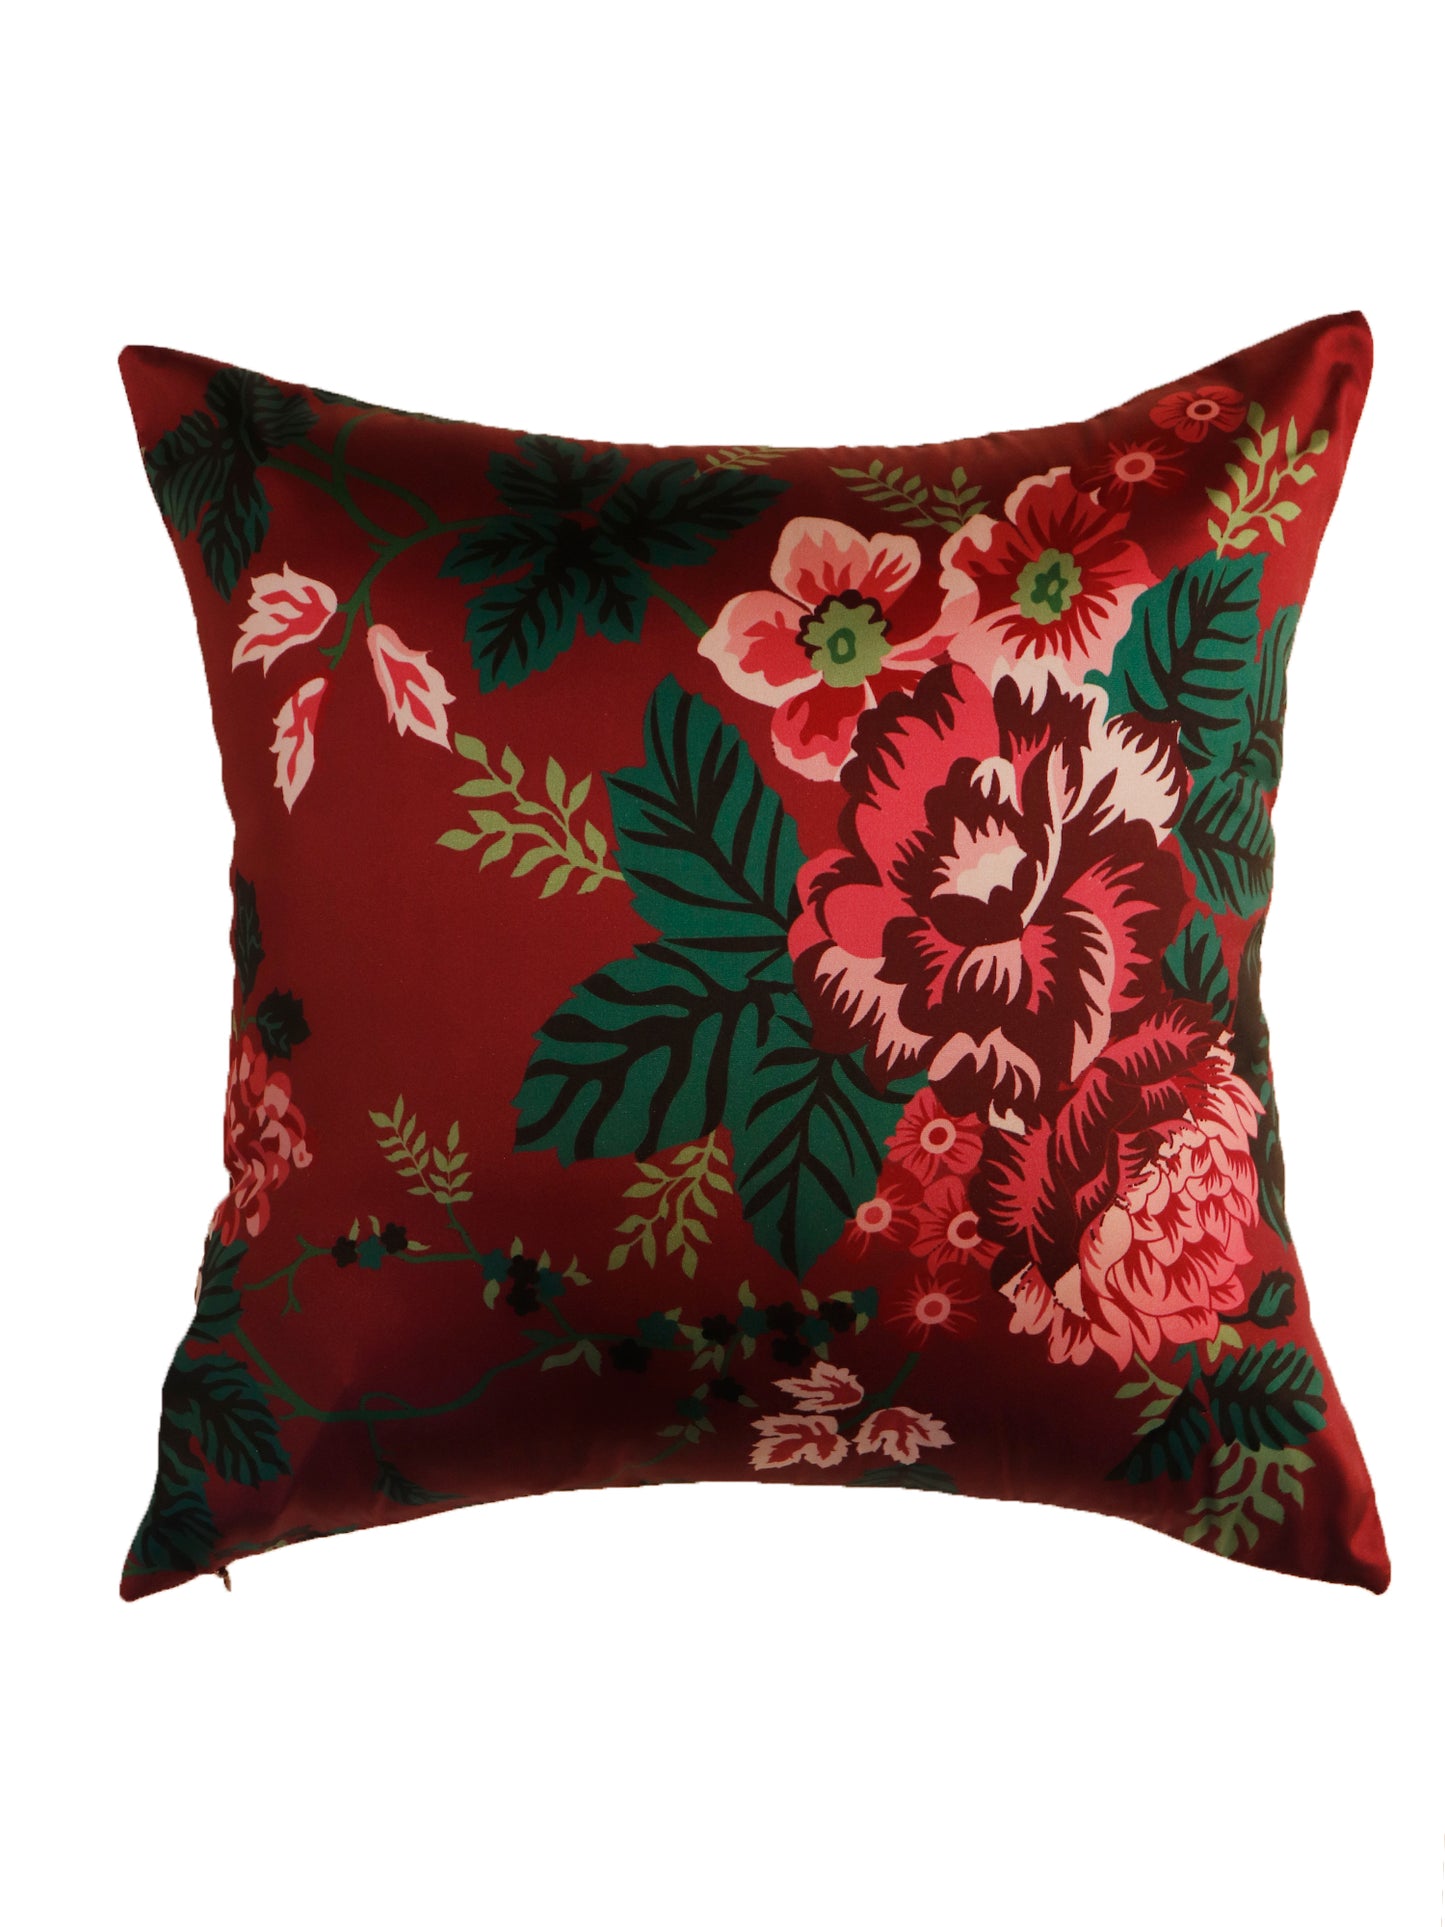 Printed Cushion Cover Polyster Maroon Green - 16"x16"